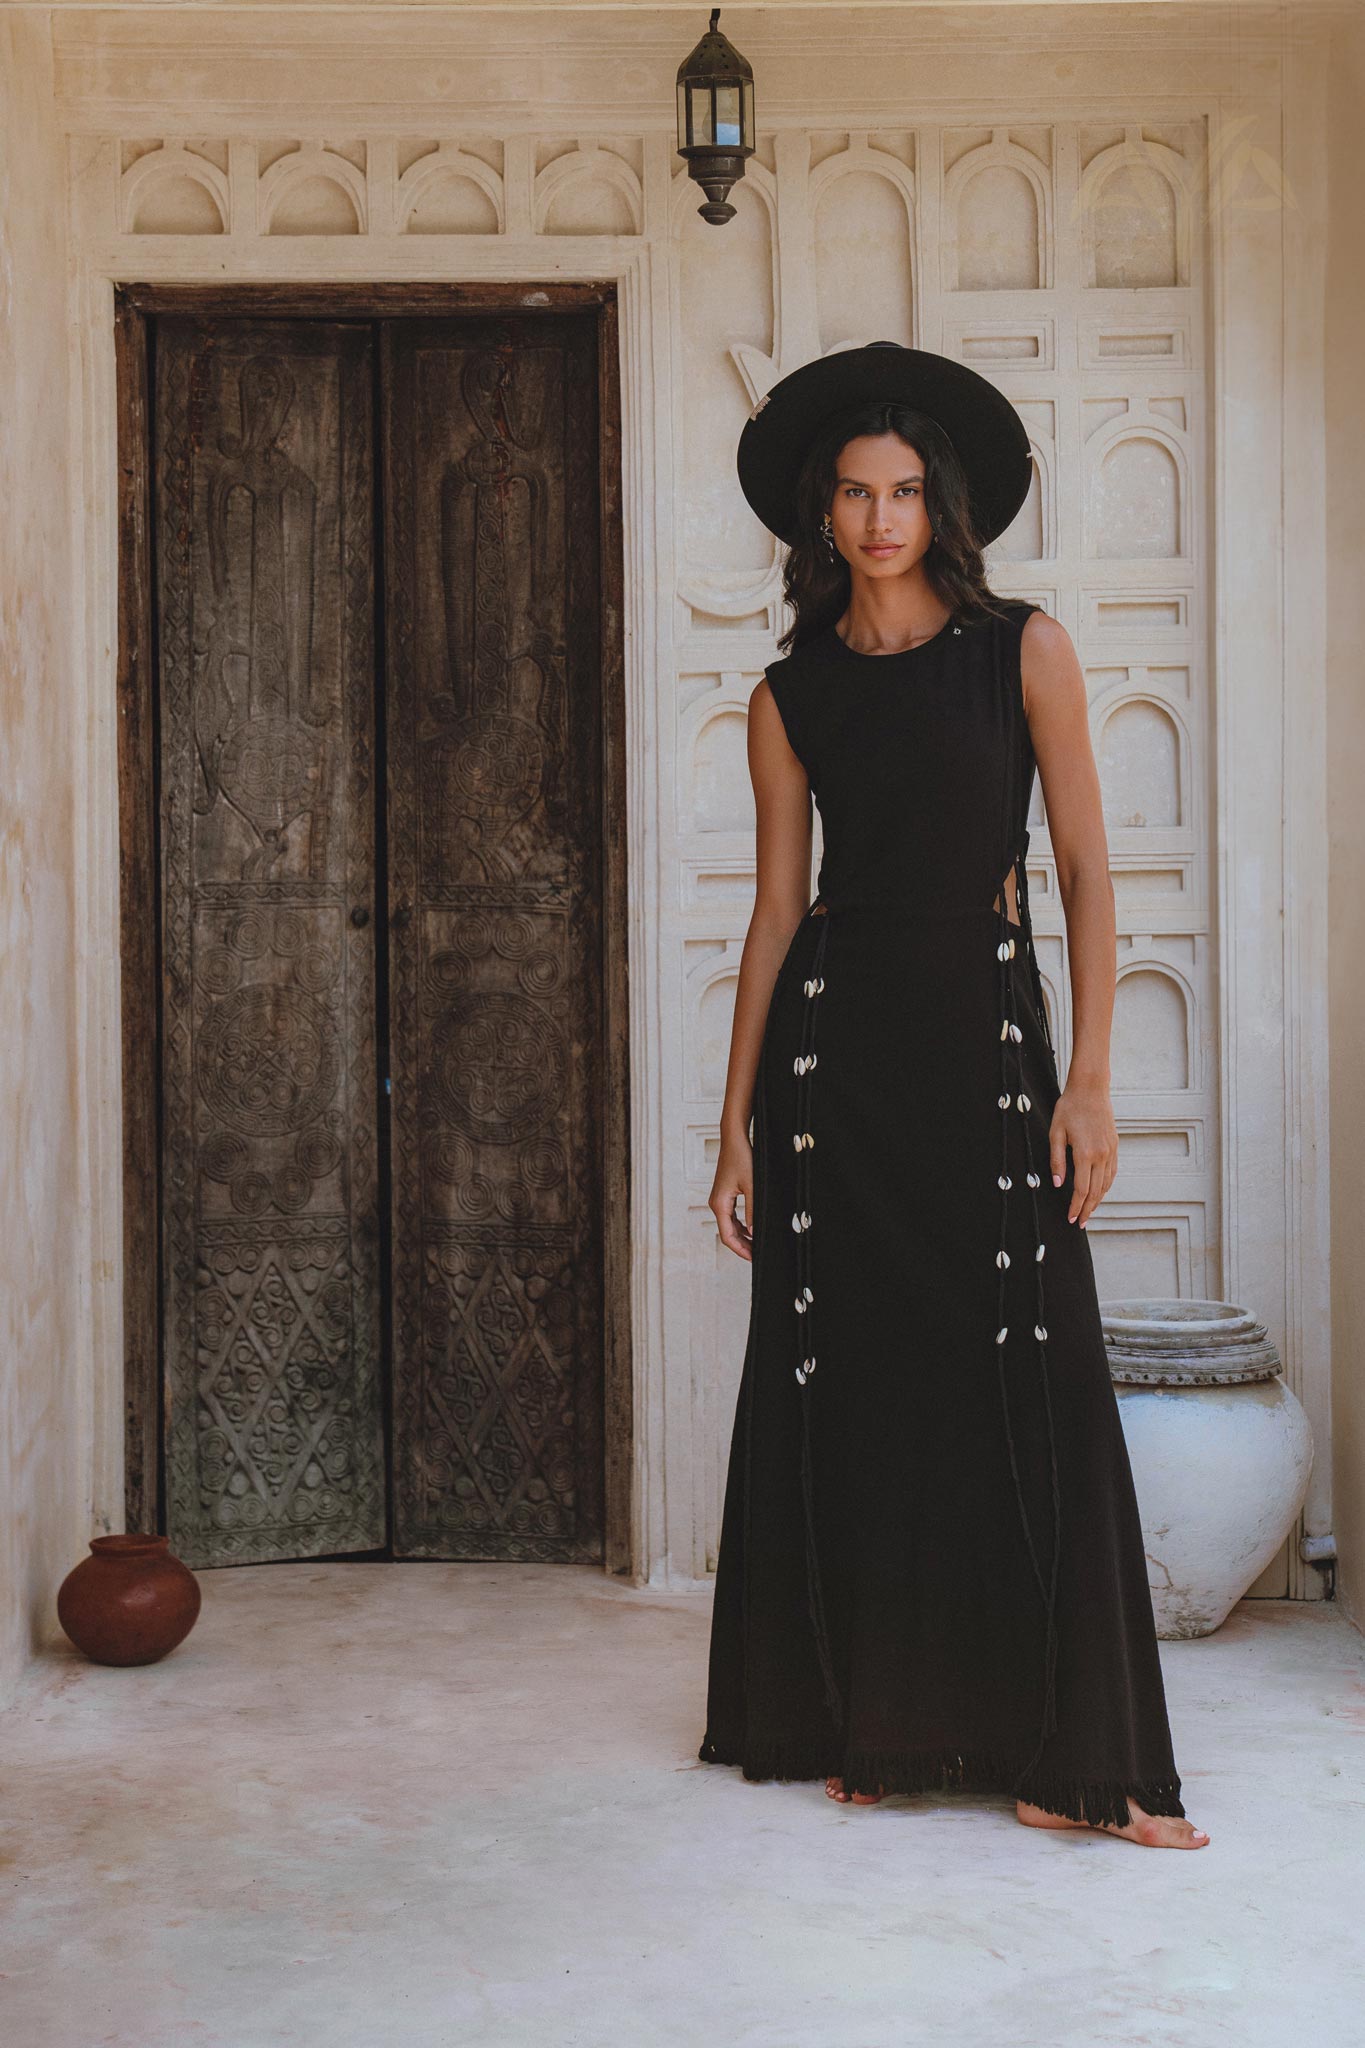 Black Boho Goddess Dress with Open Sides; Handmade Macrame Robes & Organic Cotton; Perfect for Everyday Wear.